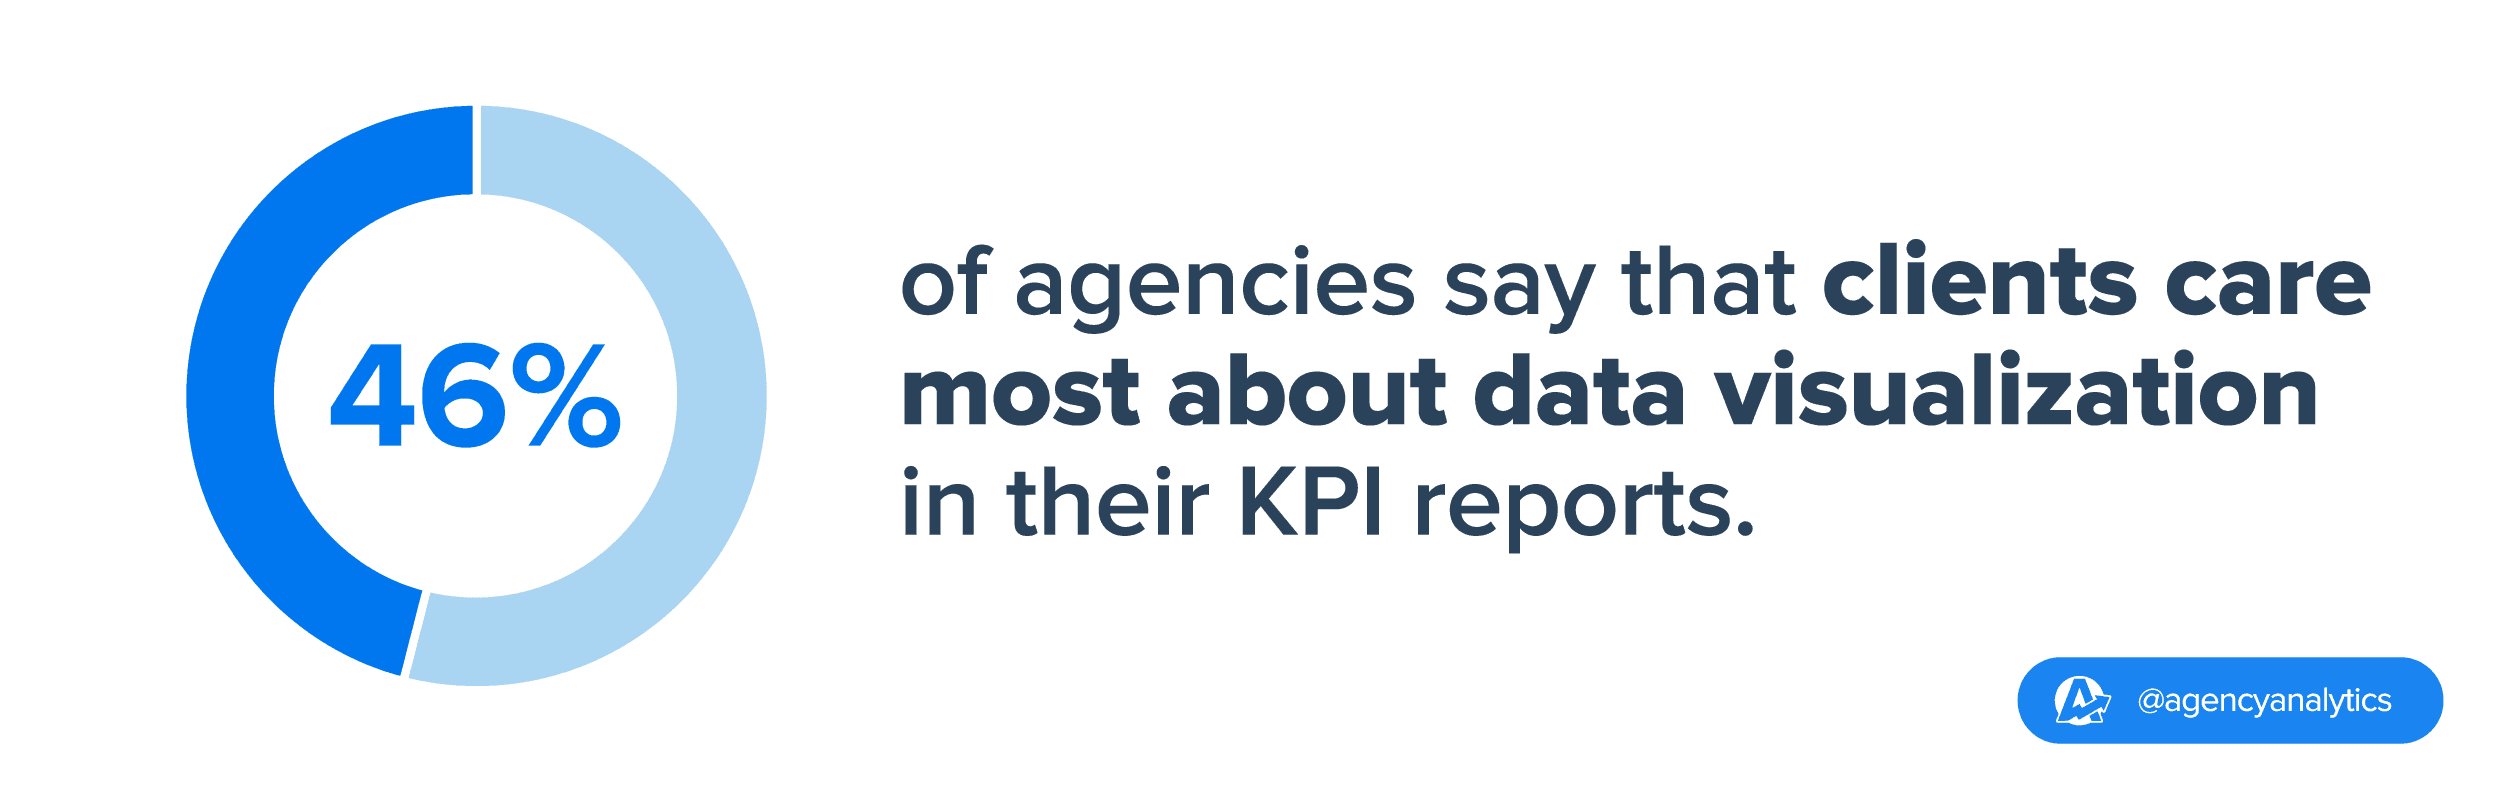 stat on importance of data visualization in client reporting 